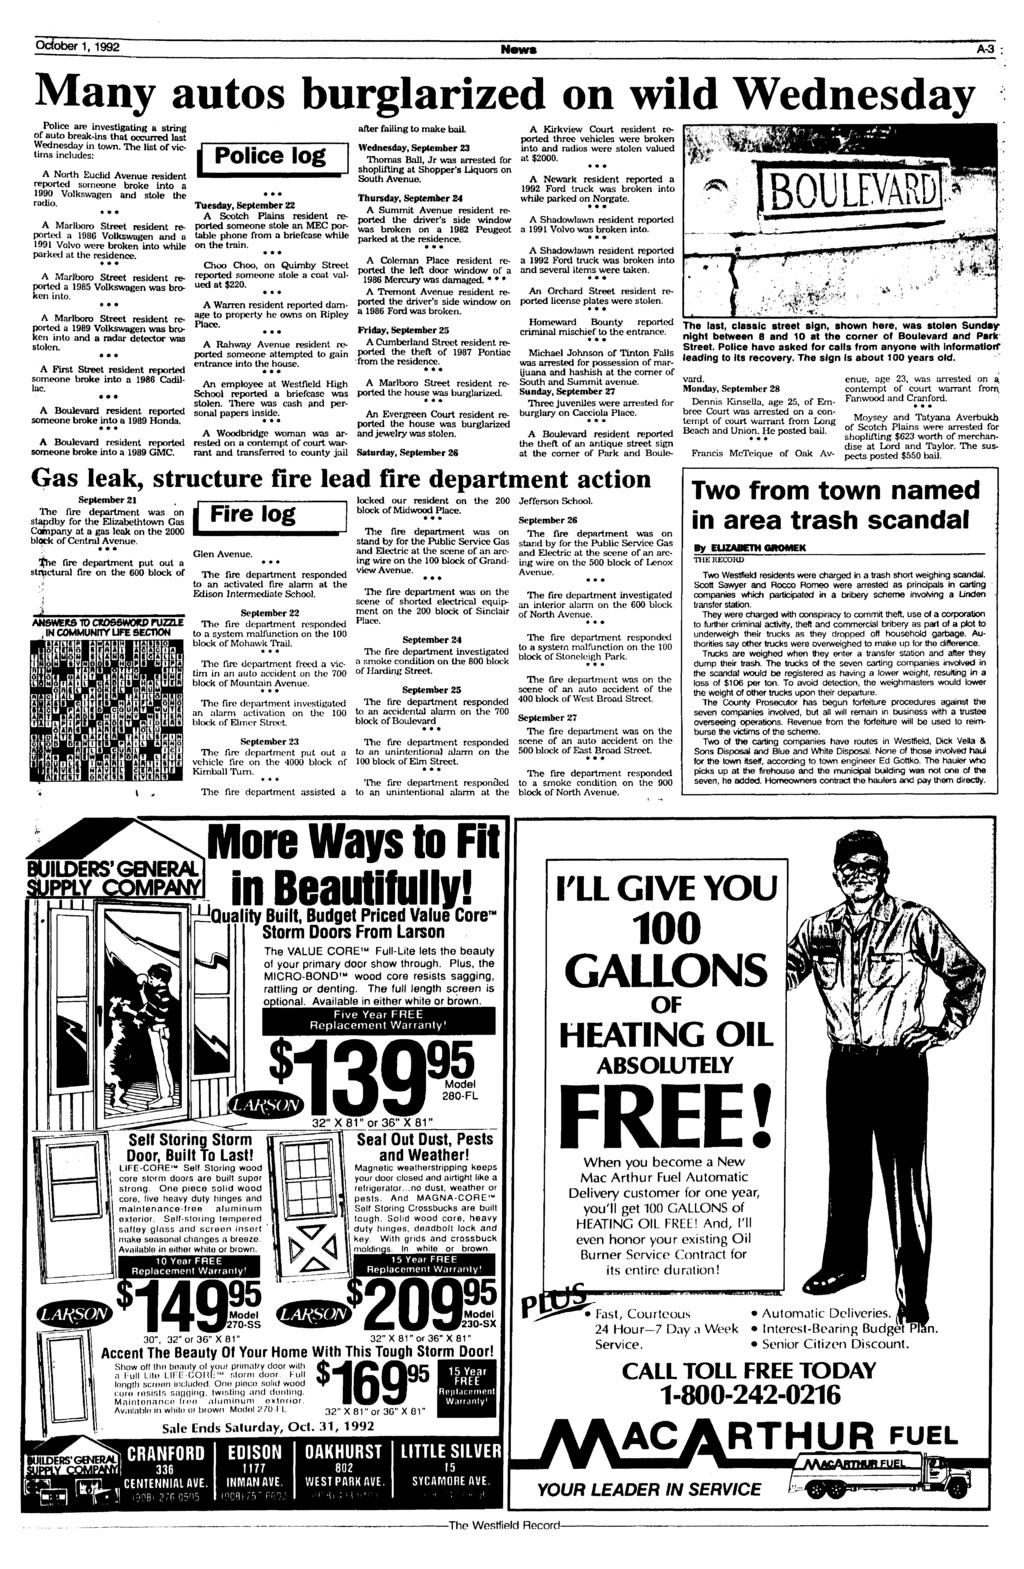 October 1,1992 News A-3 Many autos burglarized on wild Wednesday Police are investigating a string of auto break-ins that occurred last Wednesday in town.